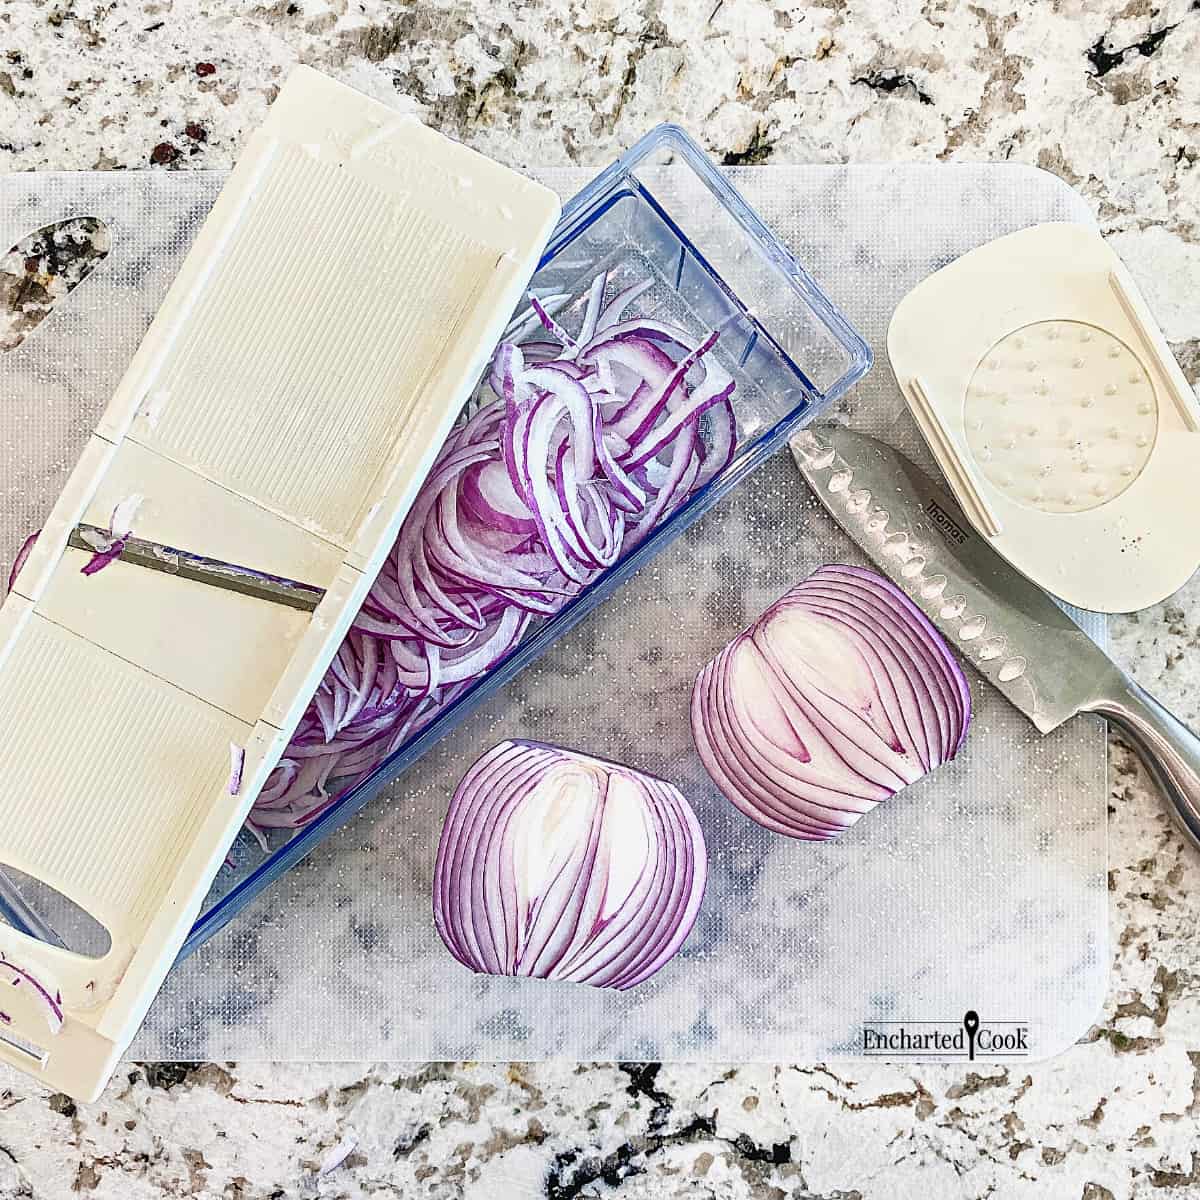 A red onion is cut with a knife and sliced thinly on a mandoline slicer.